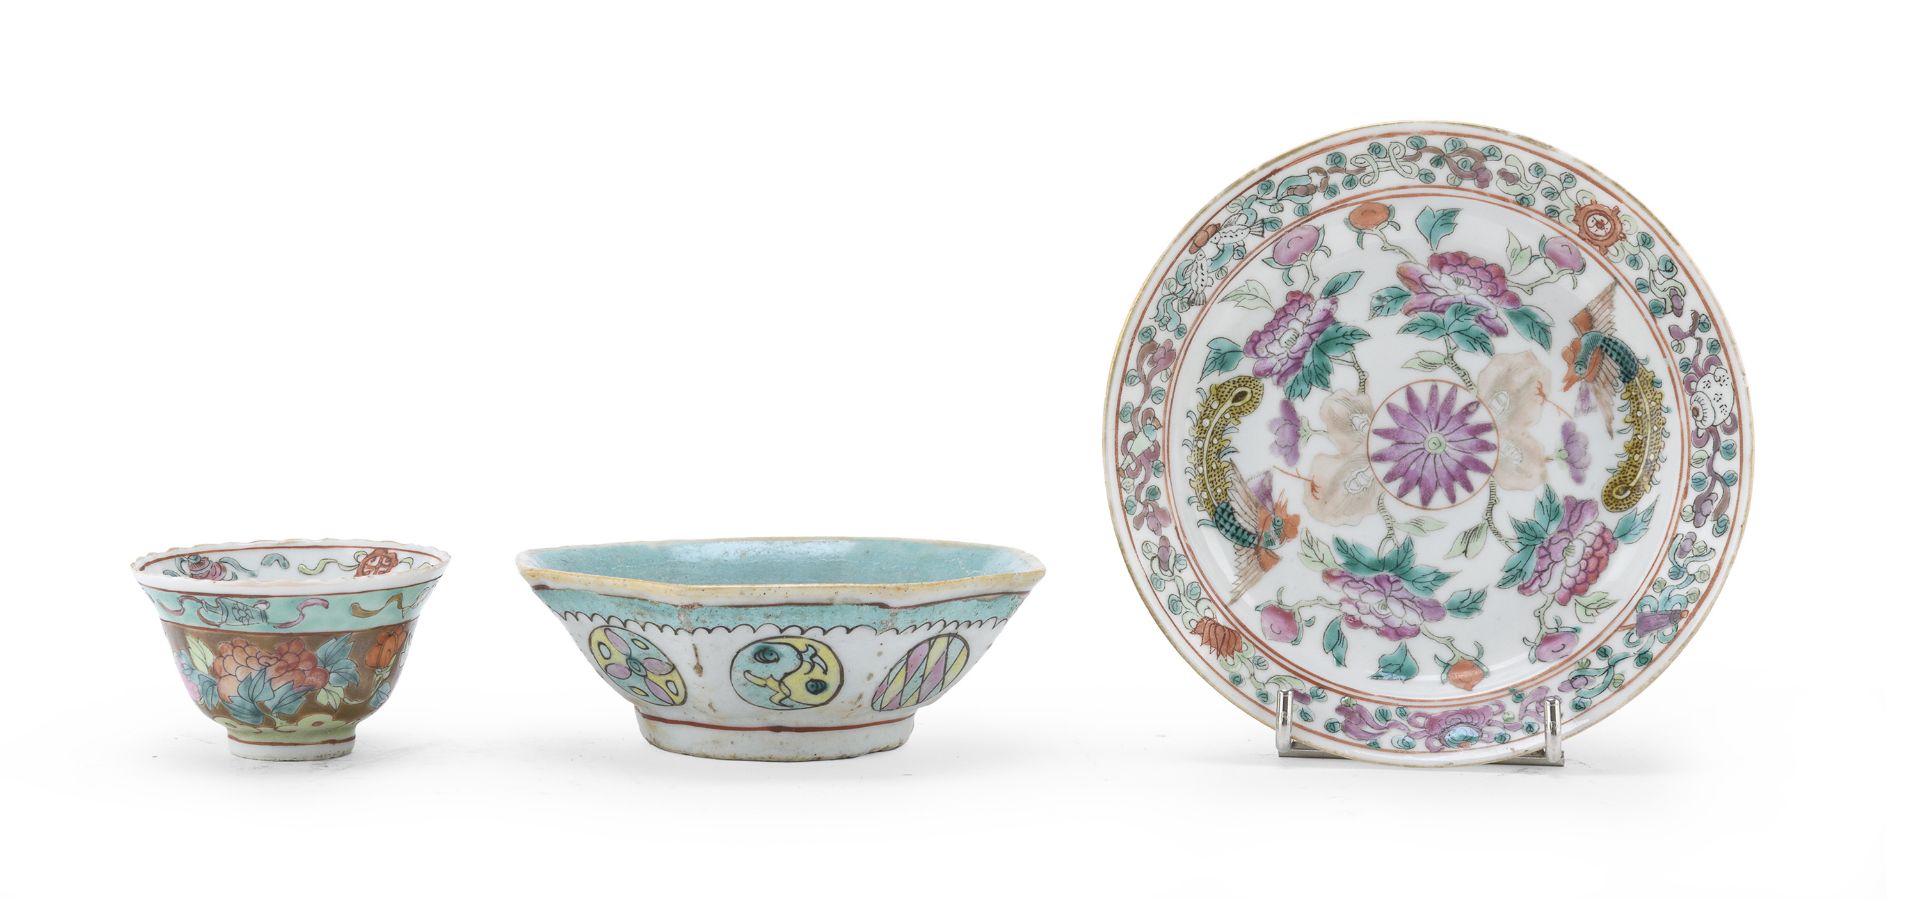 THREE POLYCHROME ENAMELED PORCELAIN OBJECTS CHINA LATE 19TH EARLY 20TH CENTURY